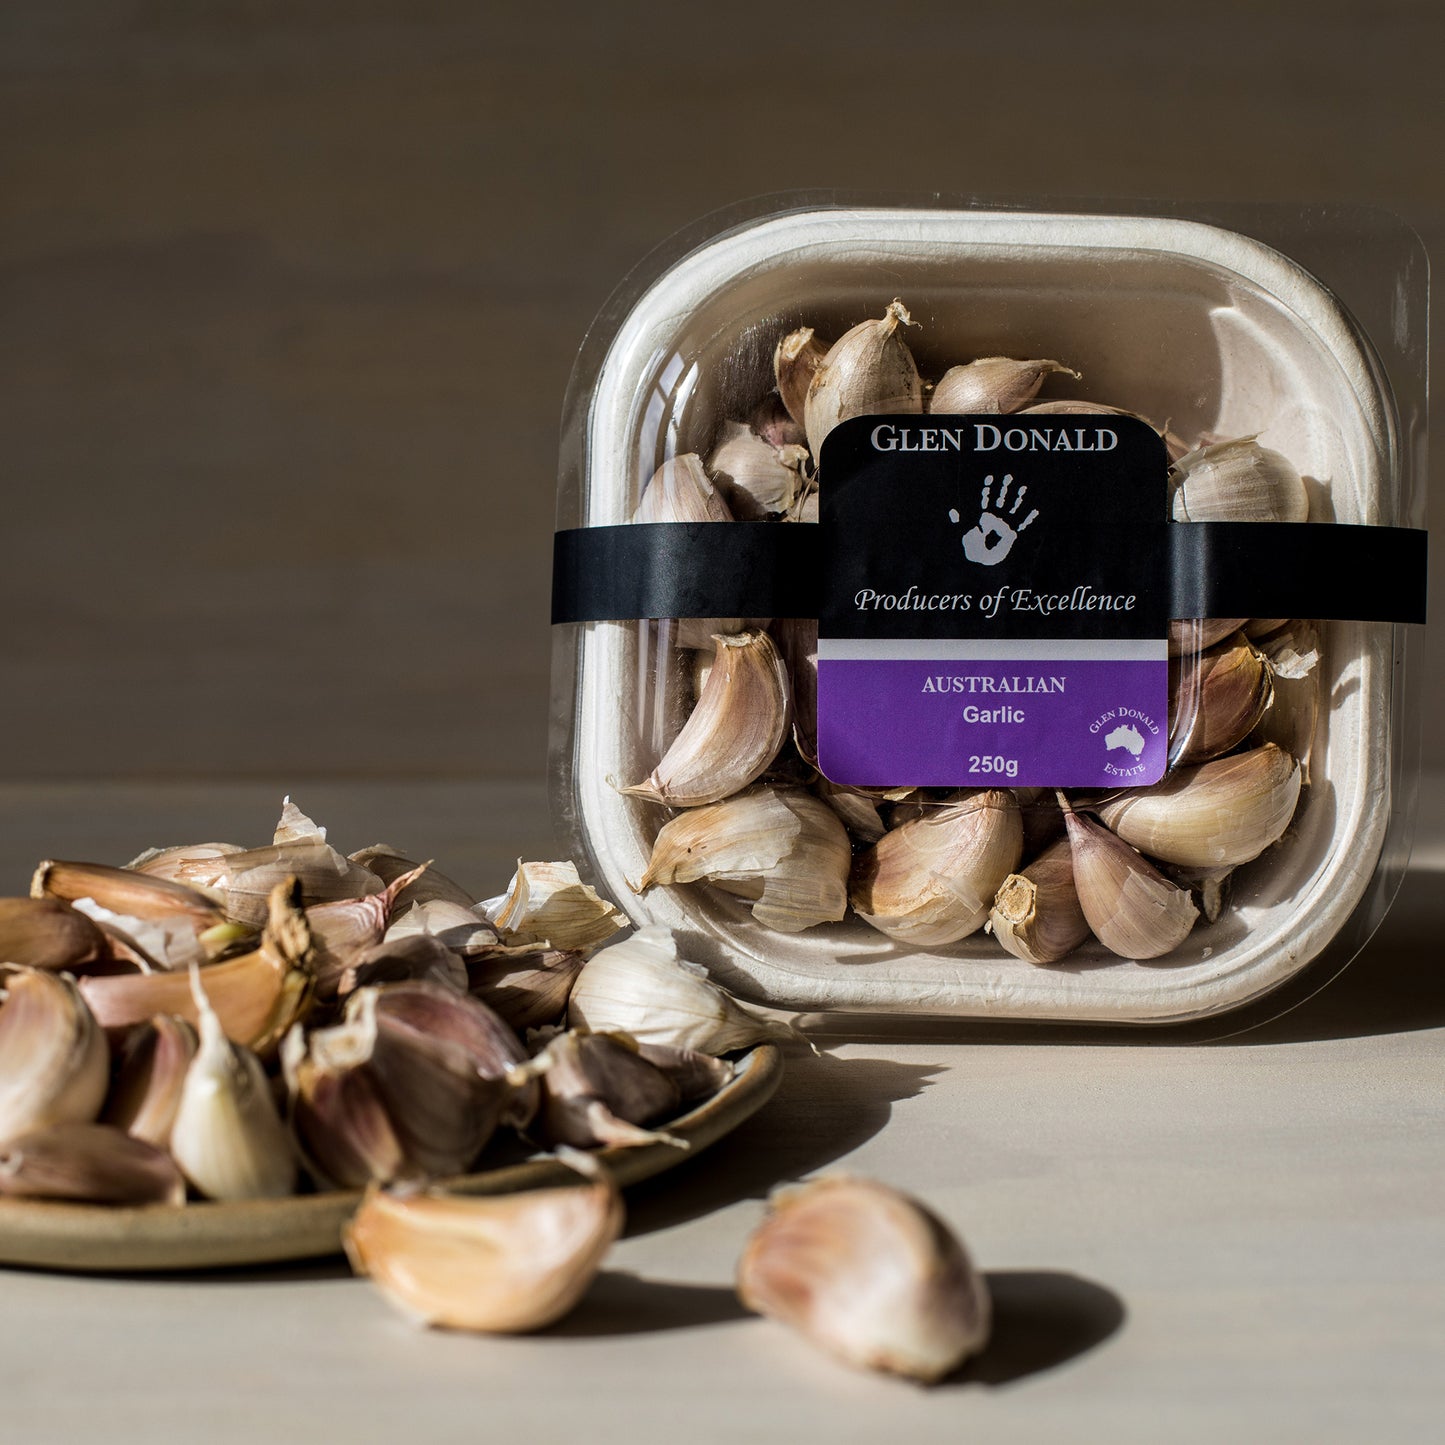 Australian grown Garlic - currently out of stock